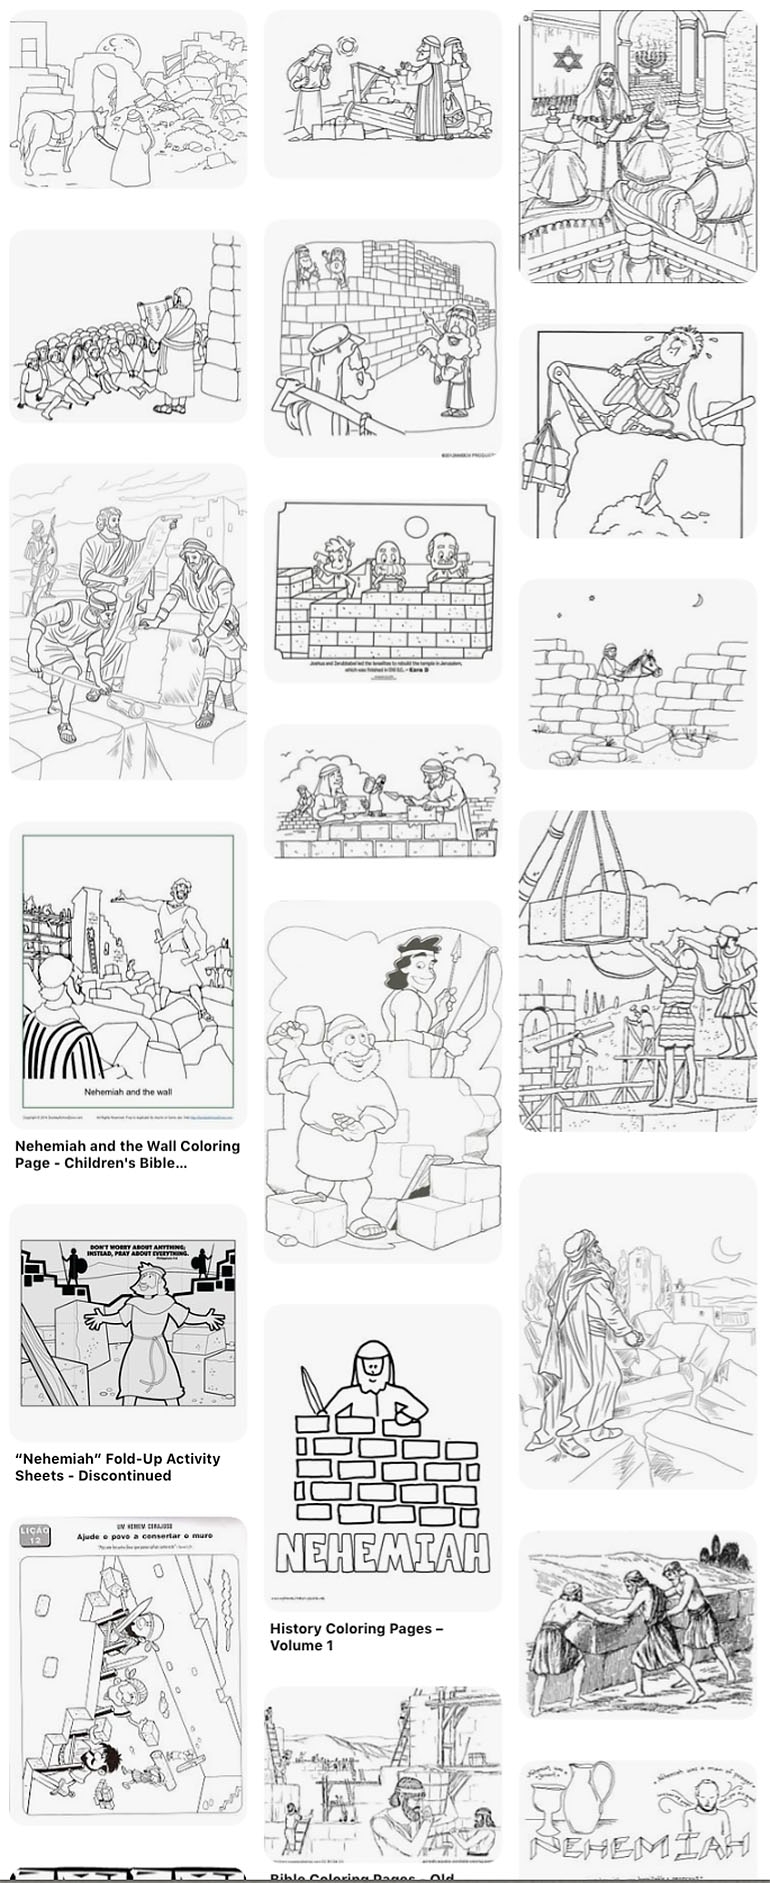 Nehemiah Rebuilds The Wall Coloring Page SundaySchoolist